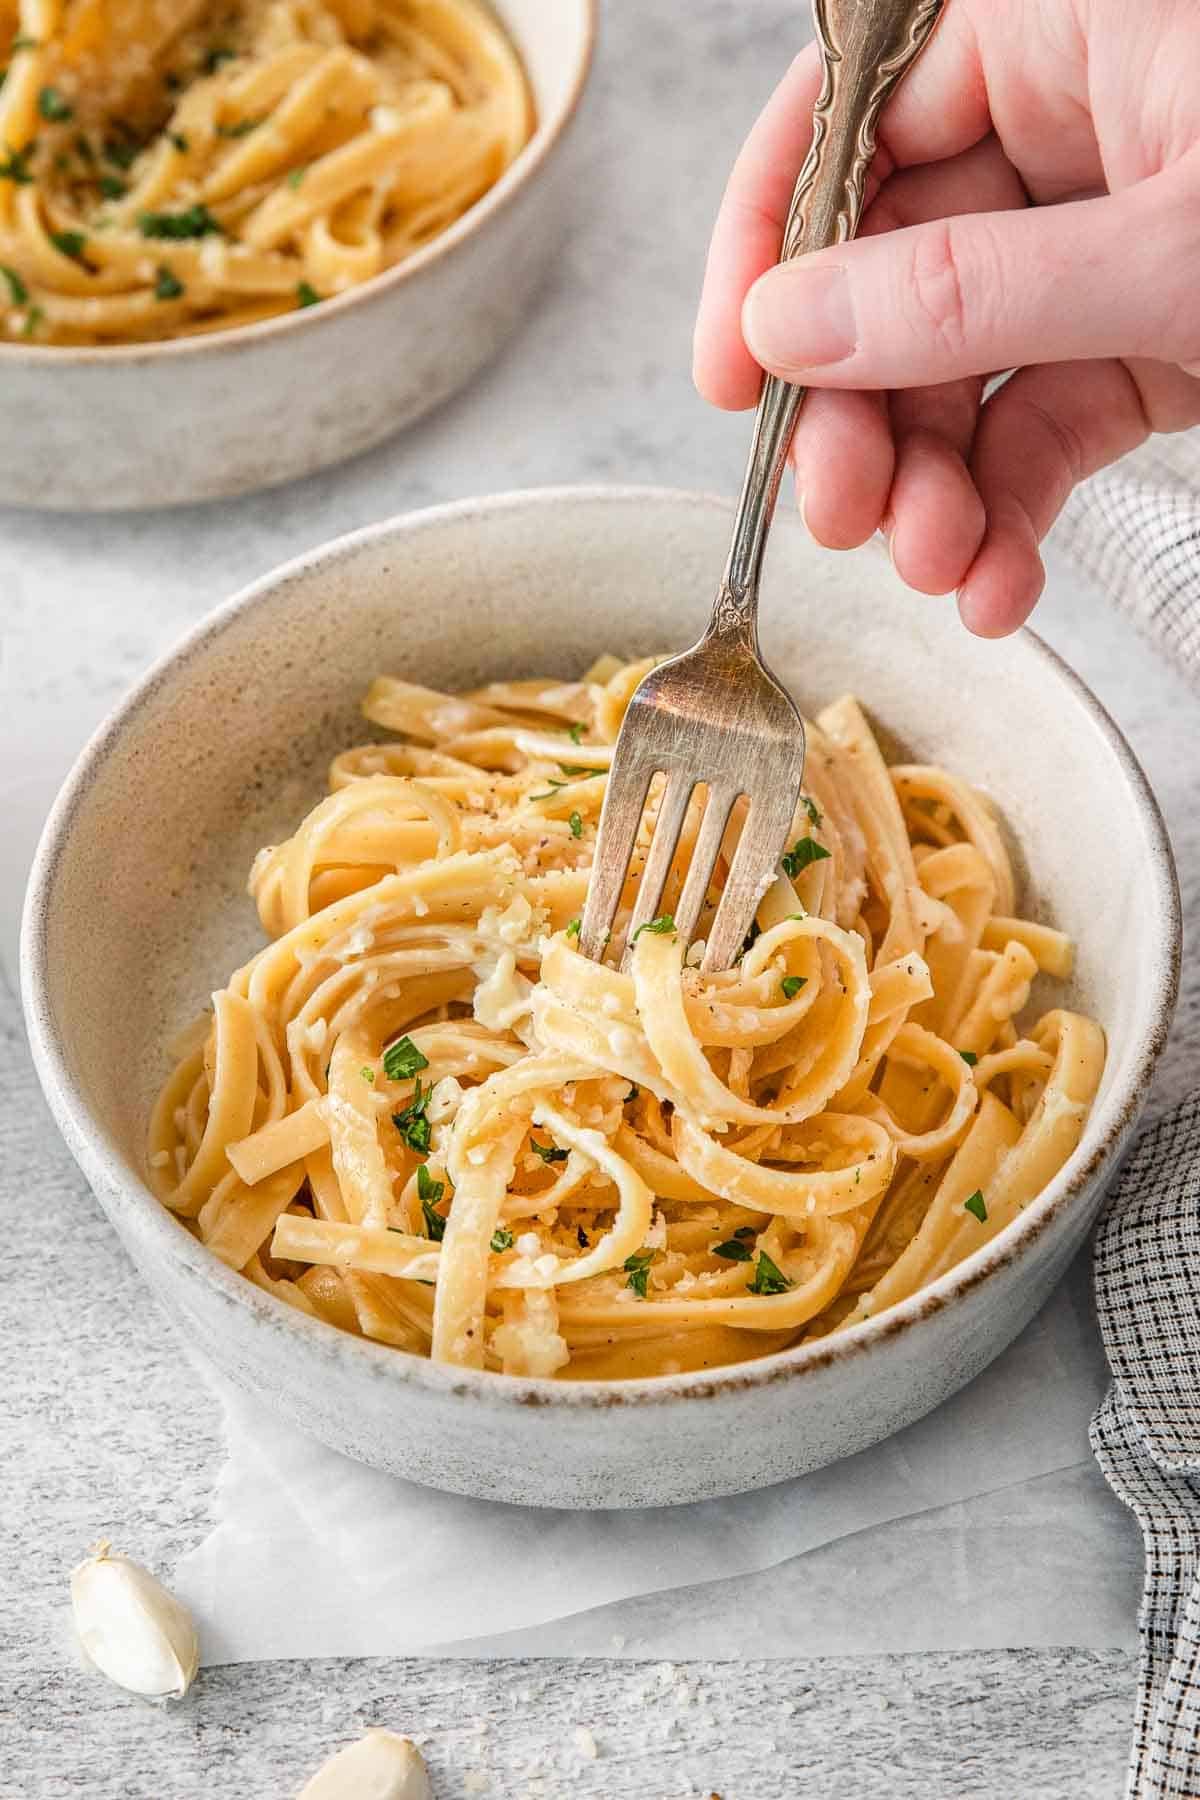 Alfredo sauce poured over white bowl of pasta with fork inserted.